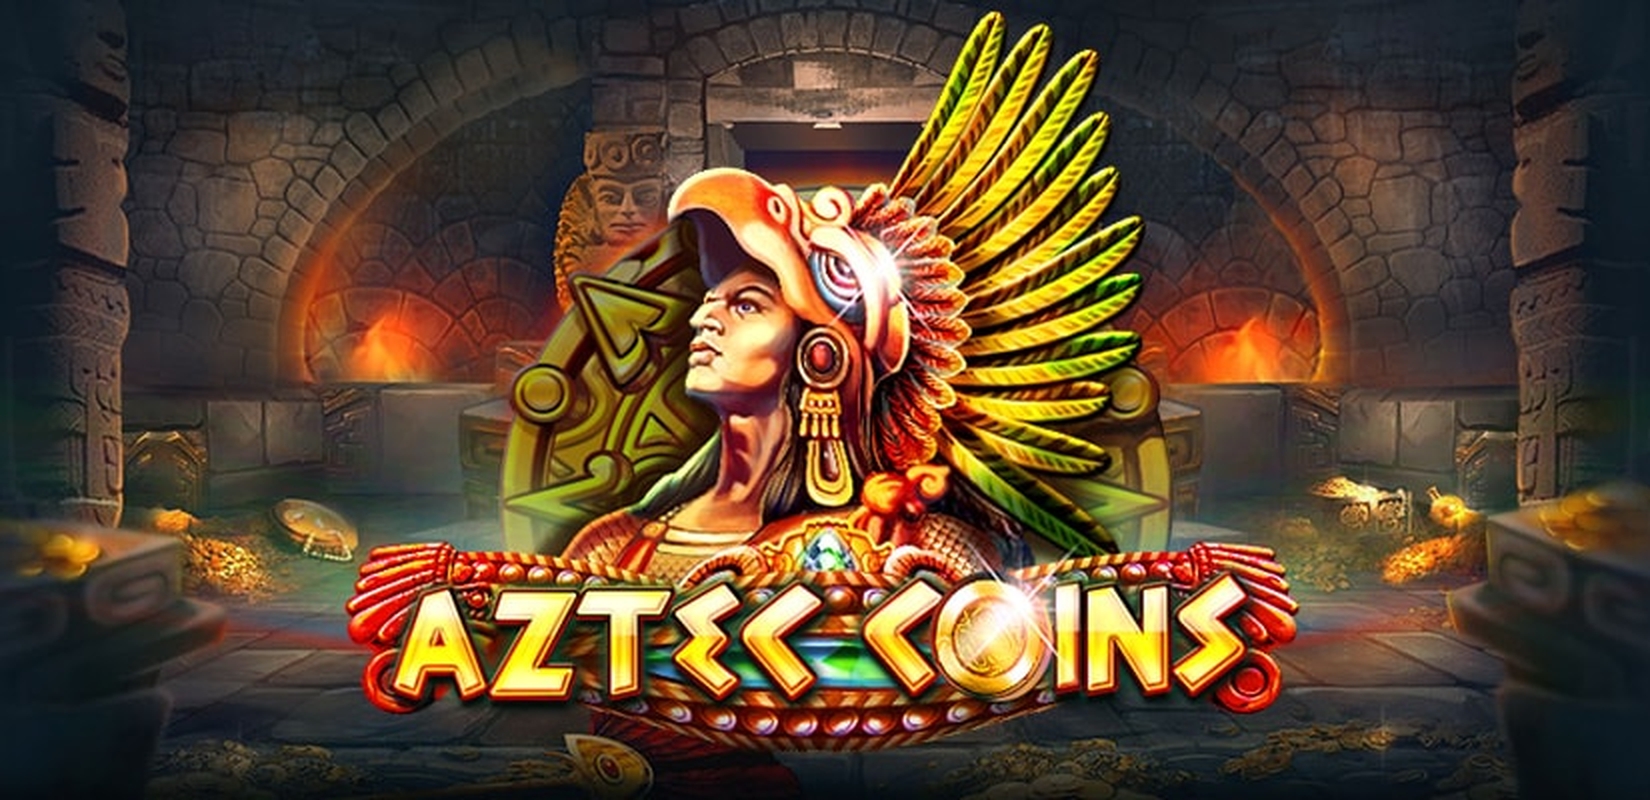 The Aztec Coins Online Slot Demo Game by Platipus